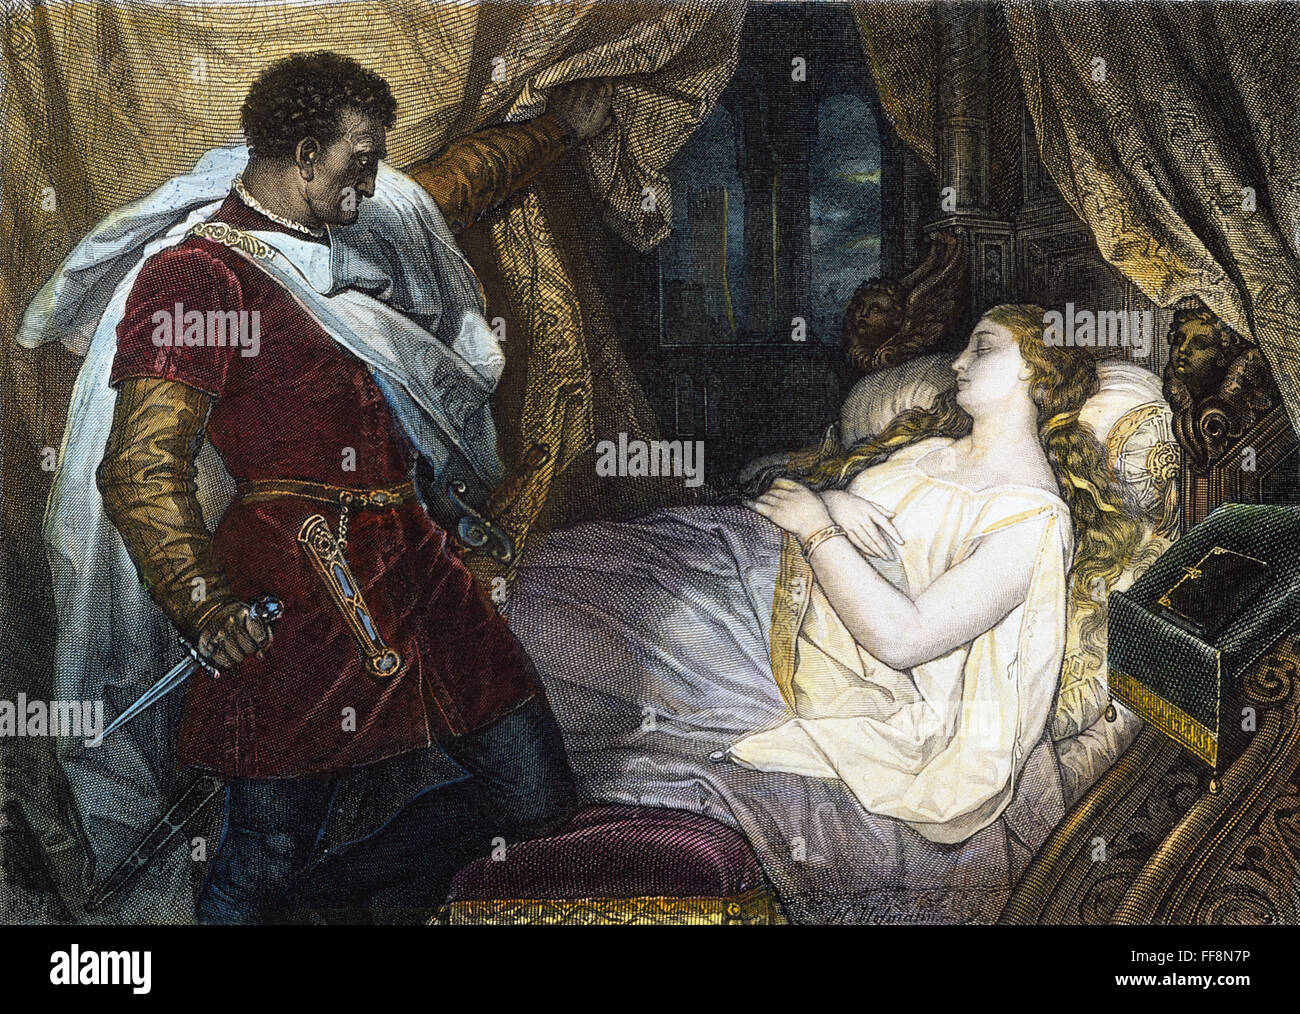 OTHELLO, 19th CENTURY. /nOthello, in a jealous frenzy aroused by Iago, prepares to murder his wife Desdemona in her sleep: engraving after Heinrich Hoffman (1824-1902). Stock Photo